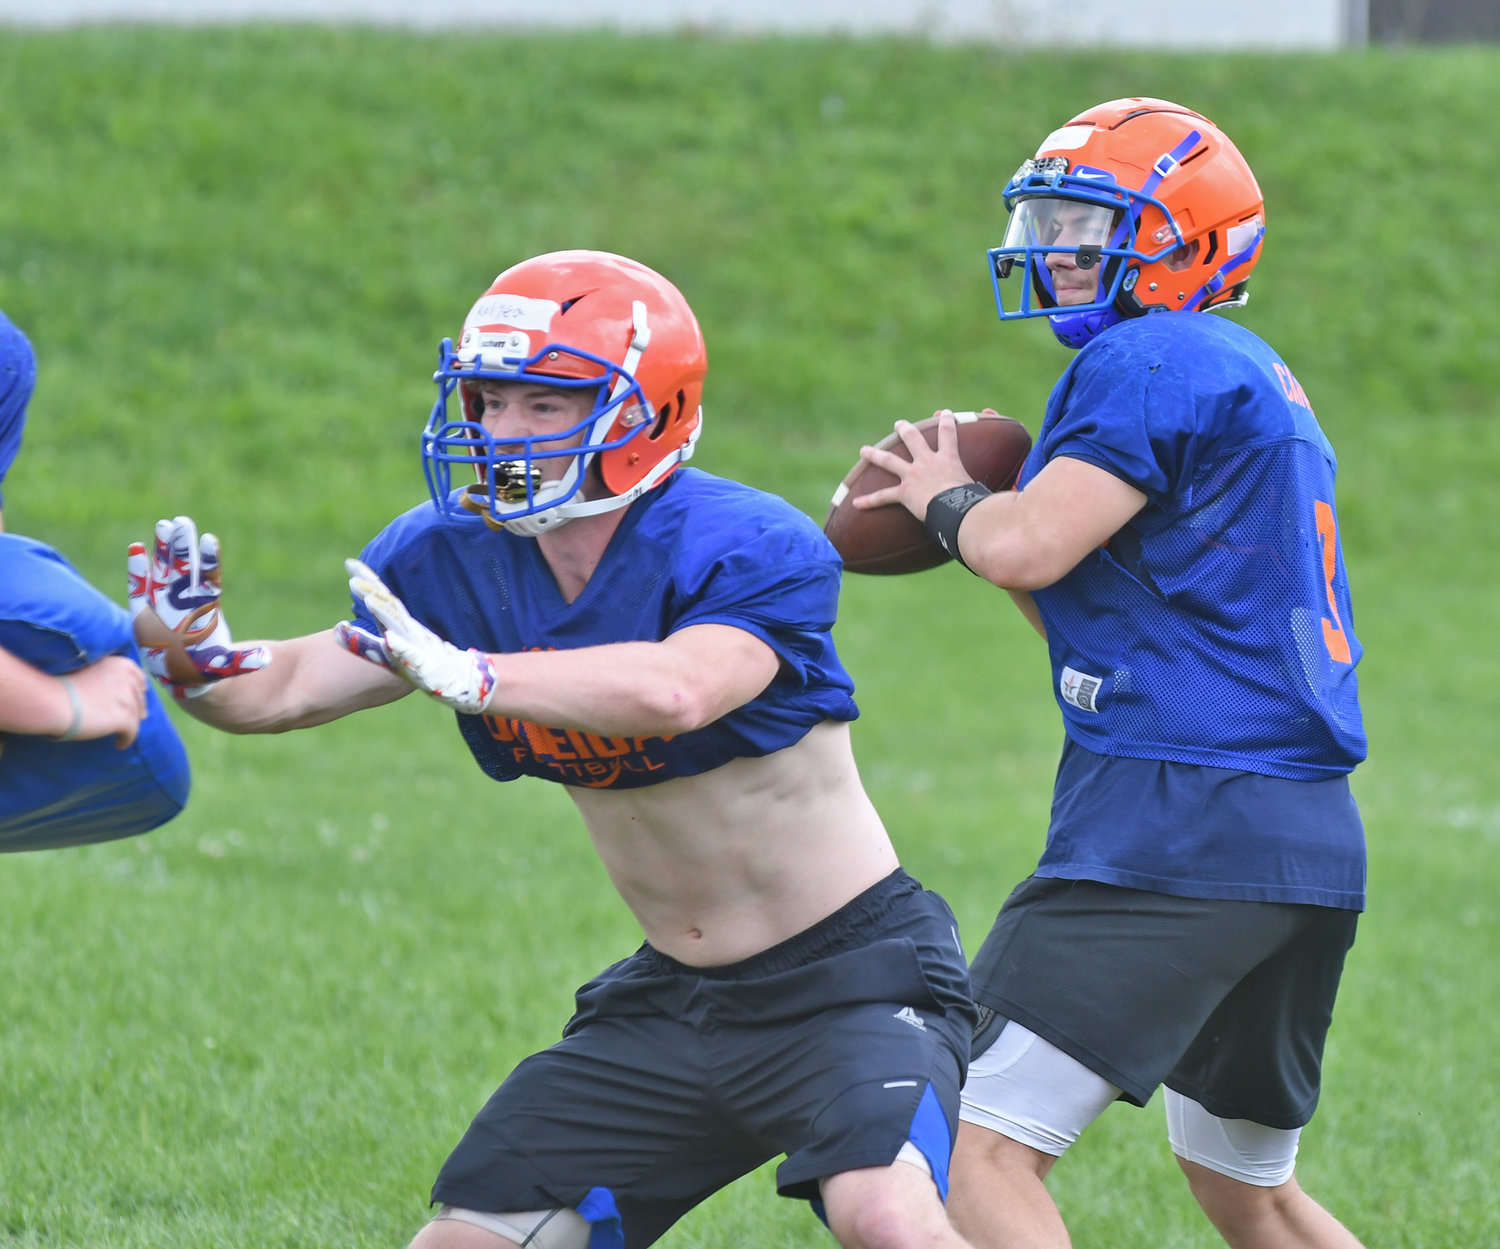 Oneida junior quarterback Bryson Carinci looks downfield to throw as junior running back Pierce Relyea blocks for him during a practice.